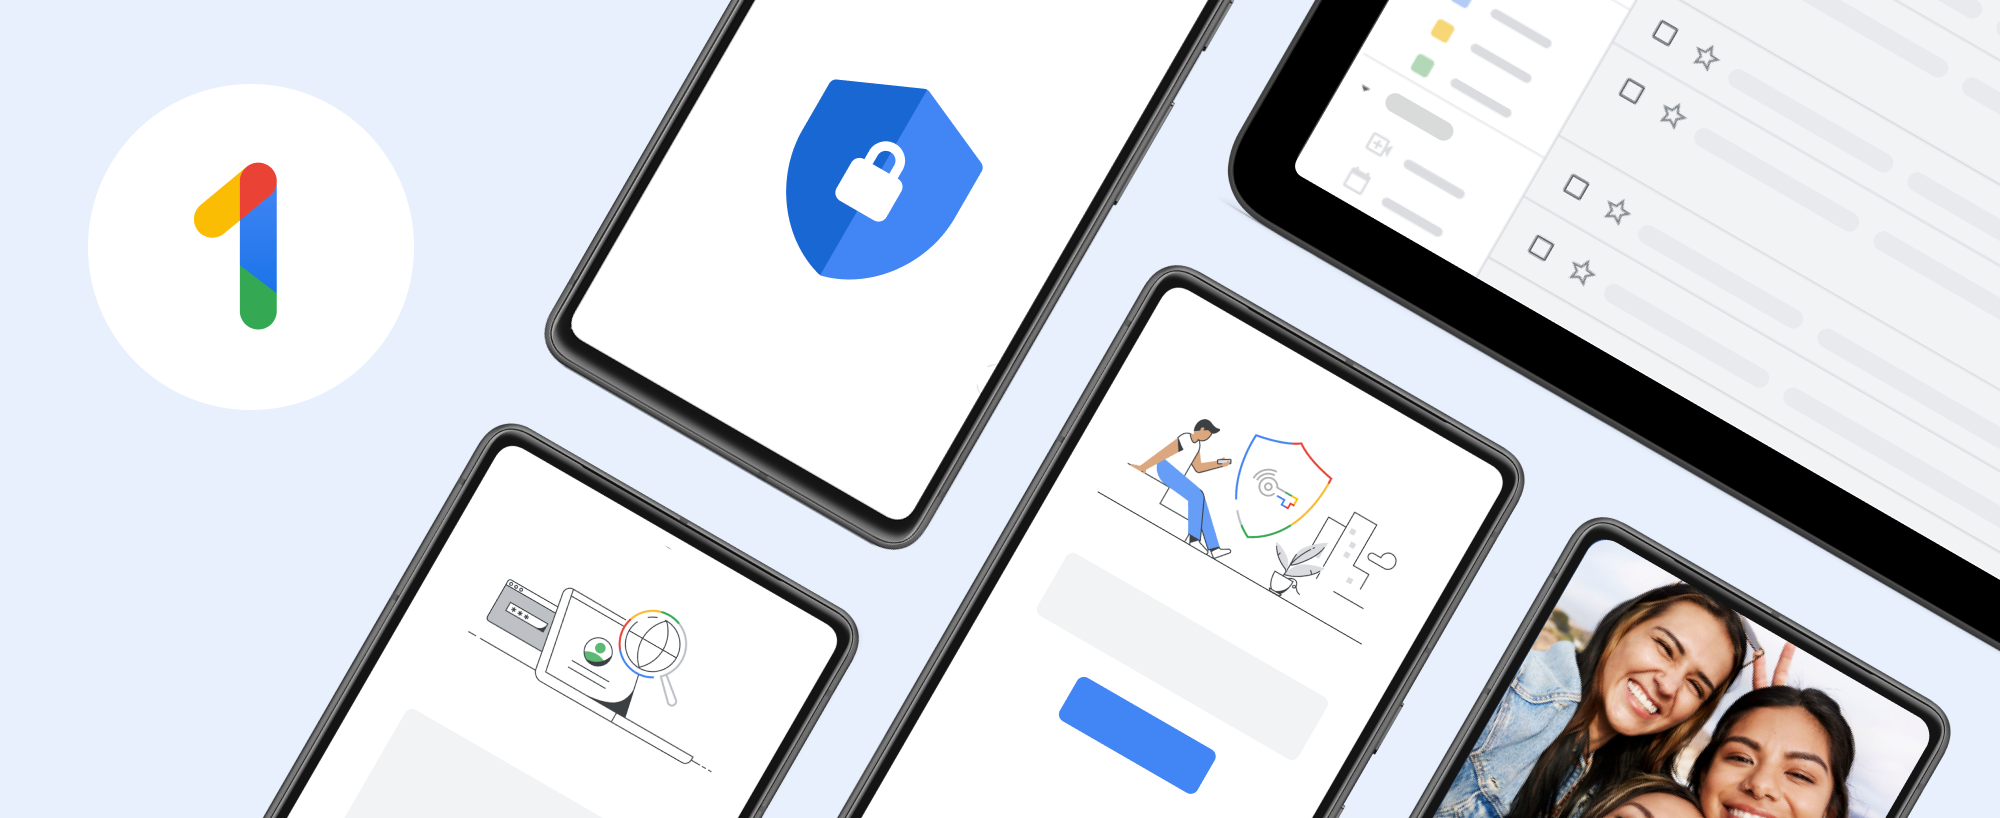 Google One subscribers to gain access to a free VPN and dark web monitoring service